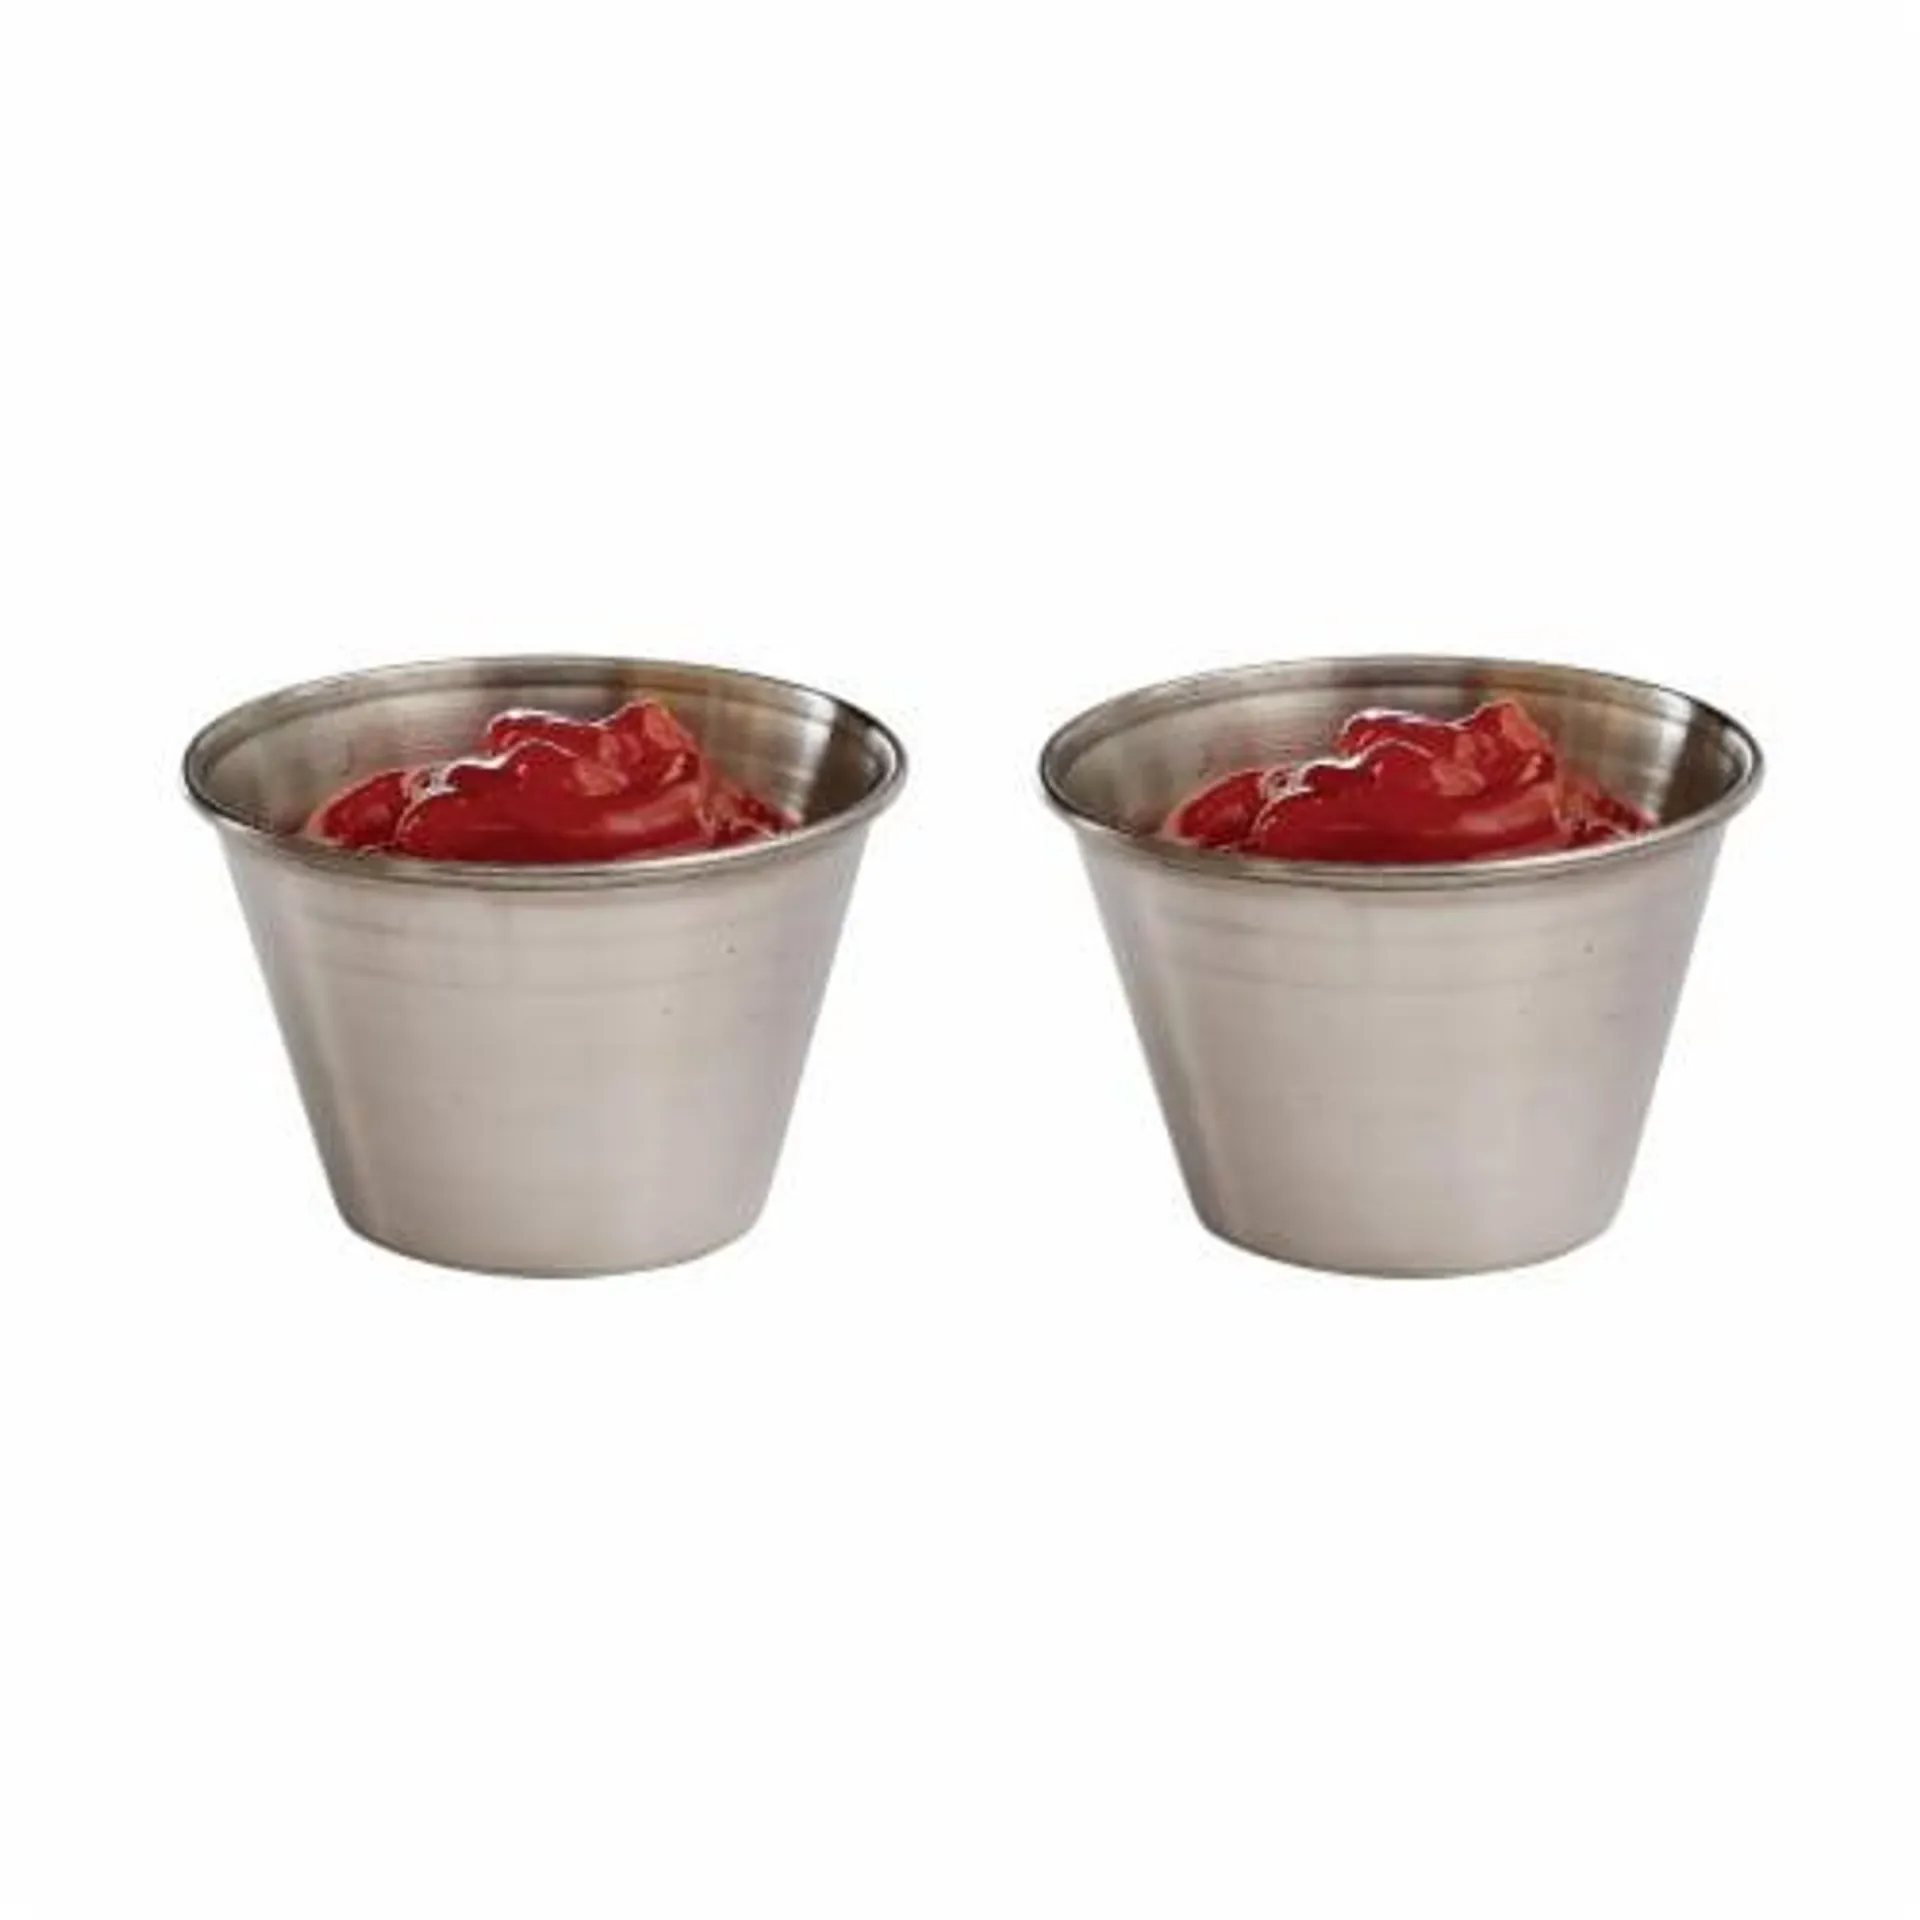 Maine Man Seafood Sauce Cups, Stainless Steel, Set of 12, 2-Ounce Capacity